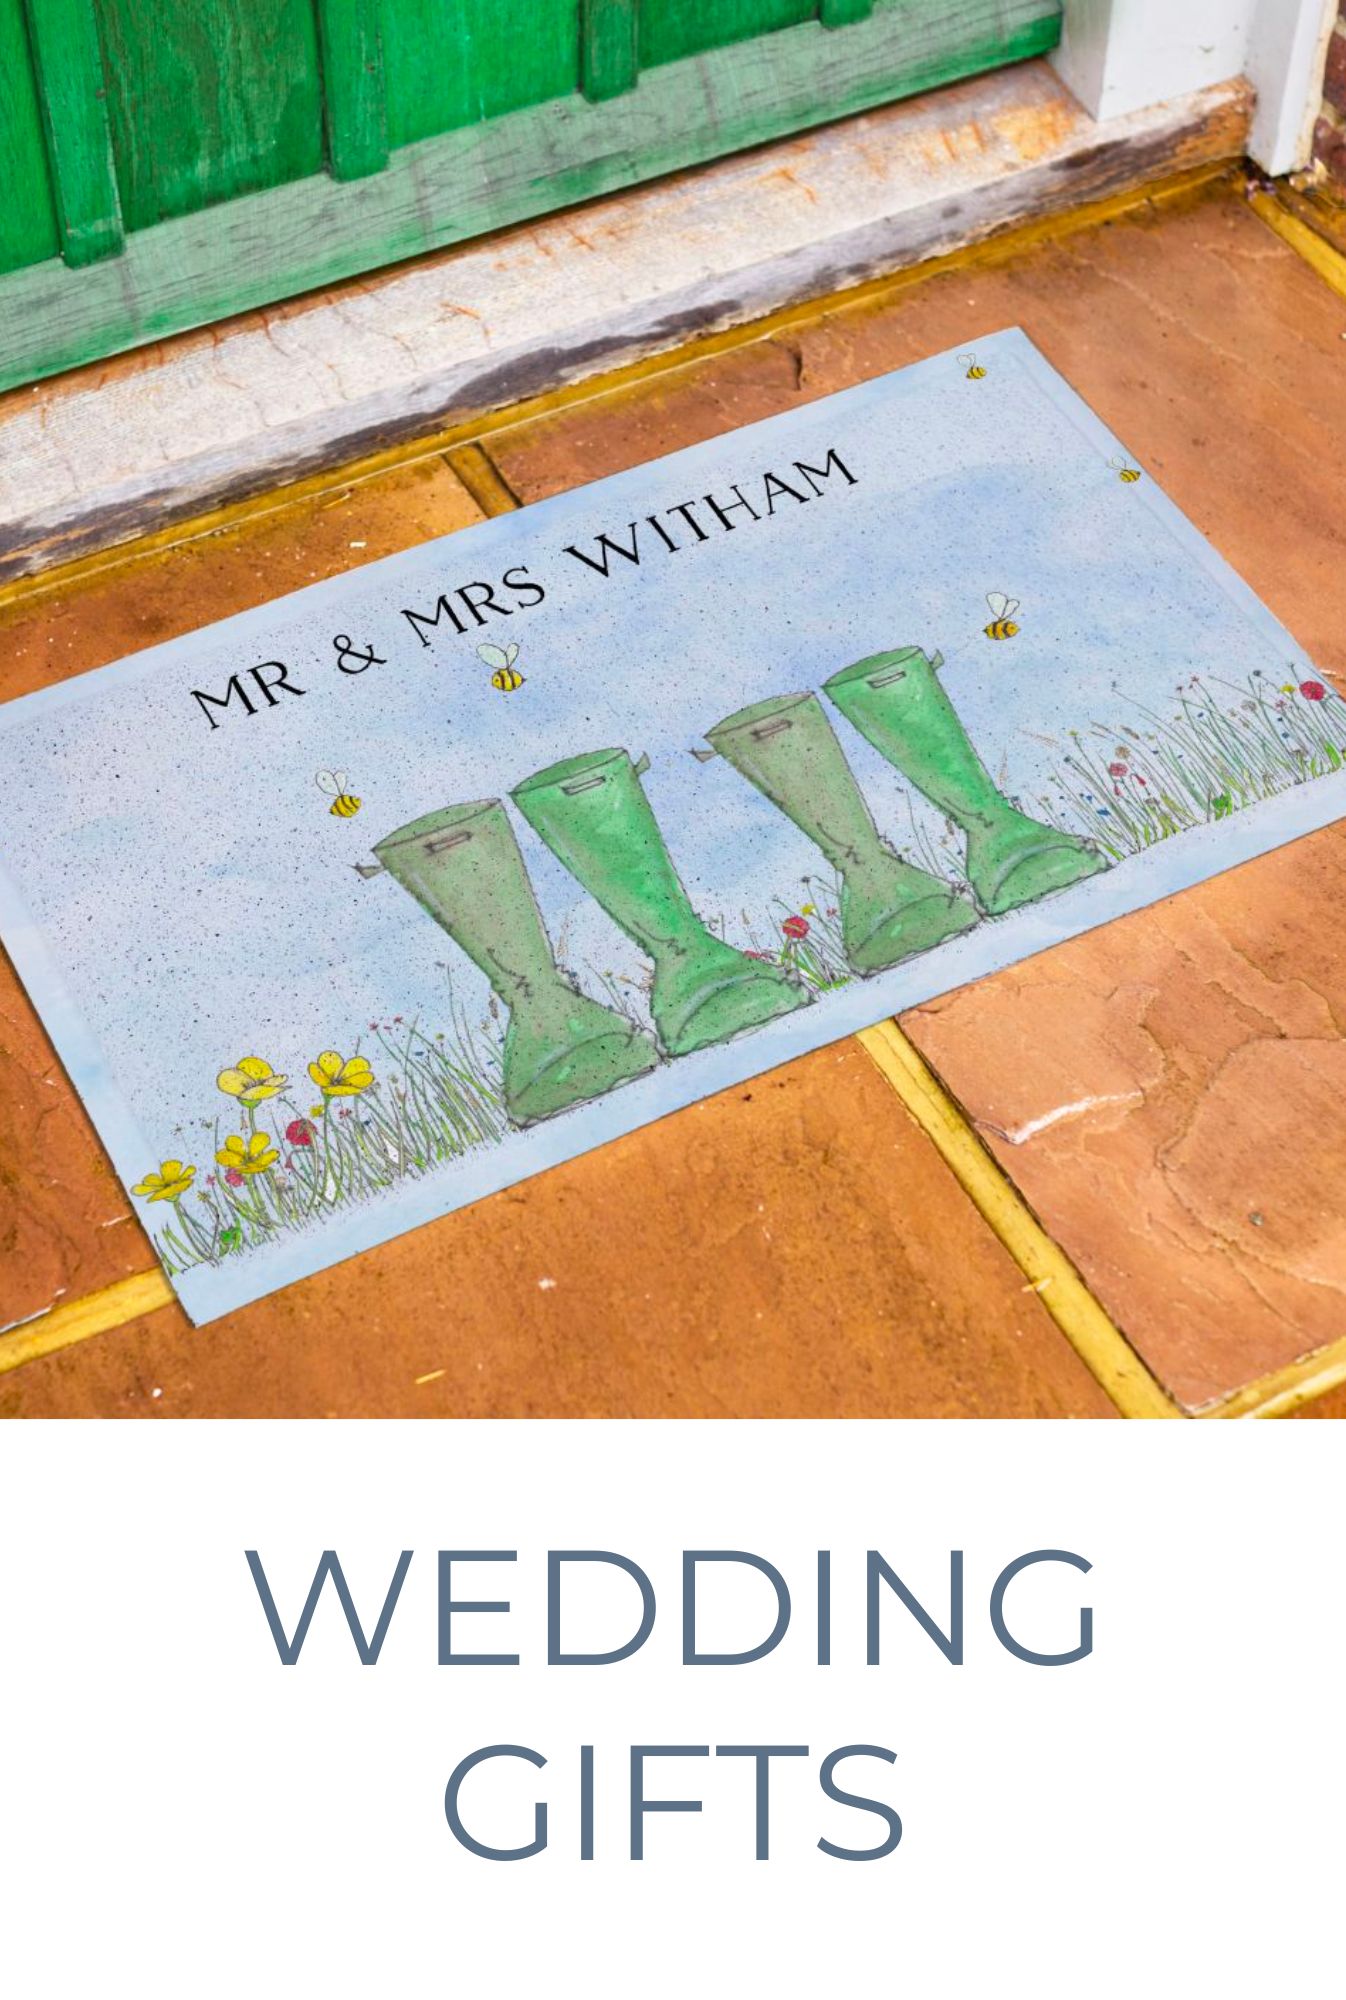 Wedding Gifts and Wedding Cards